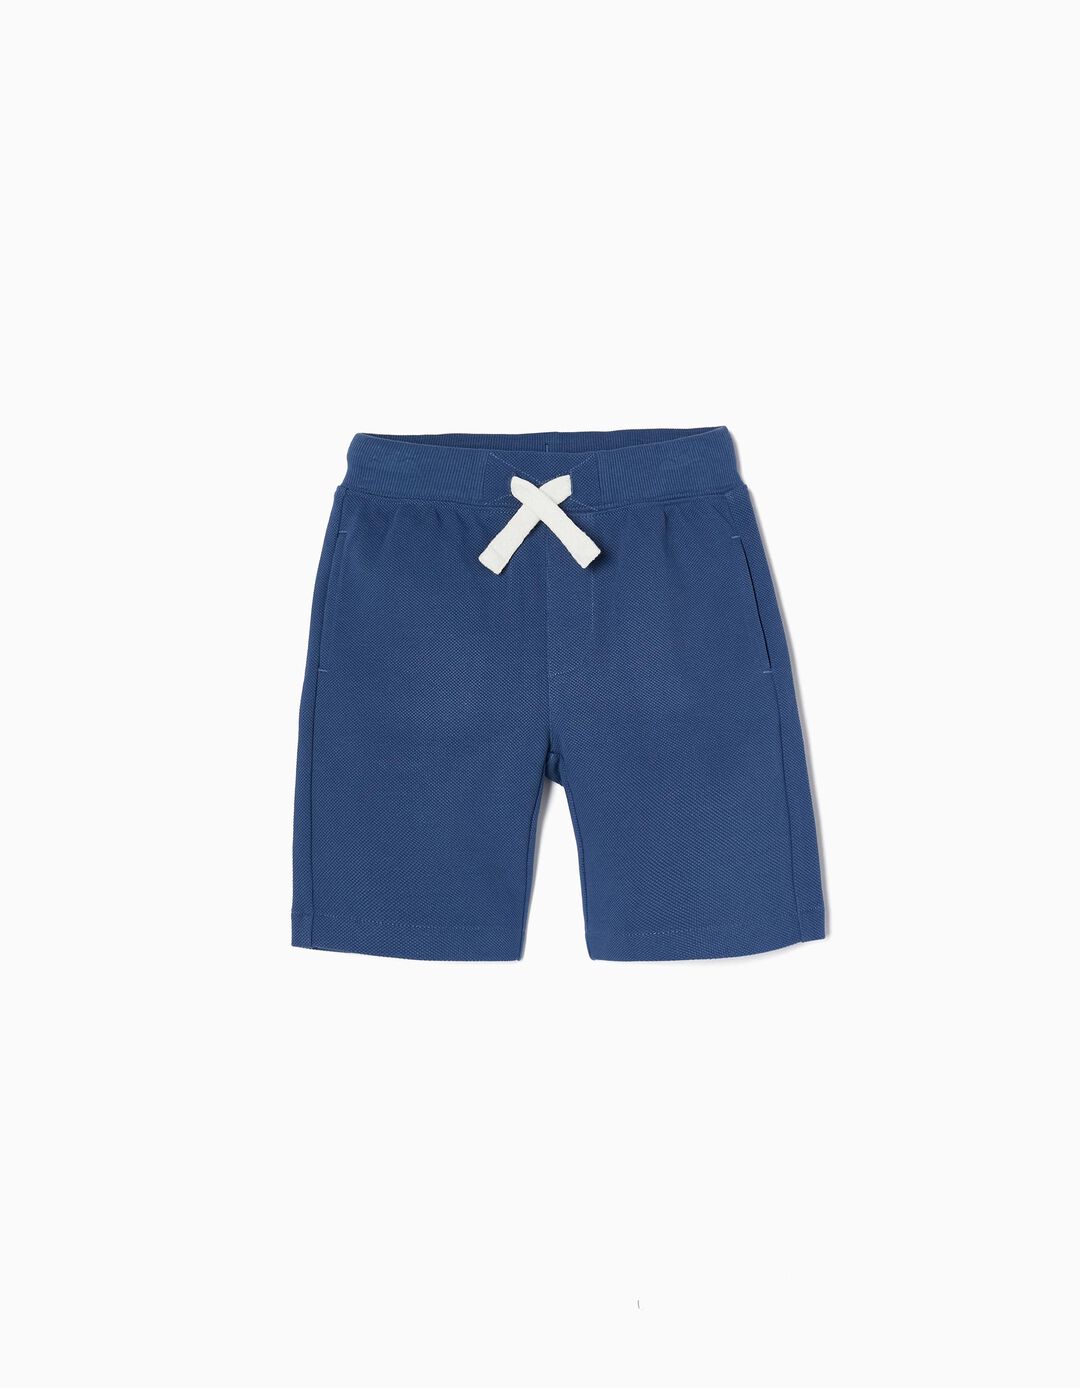 Sports Shorts for Boys, Blue